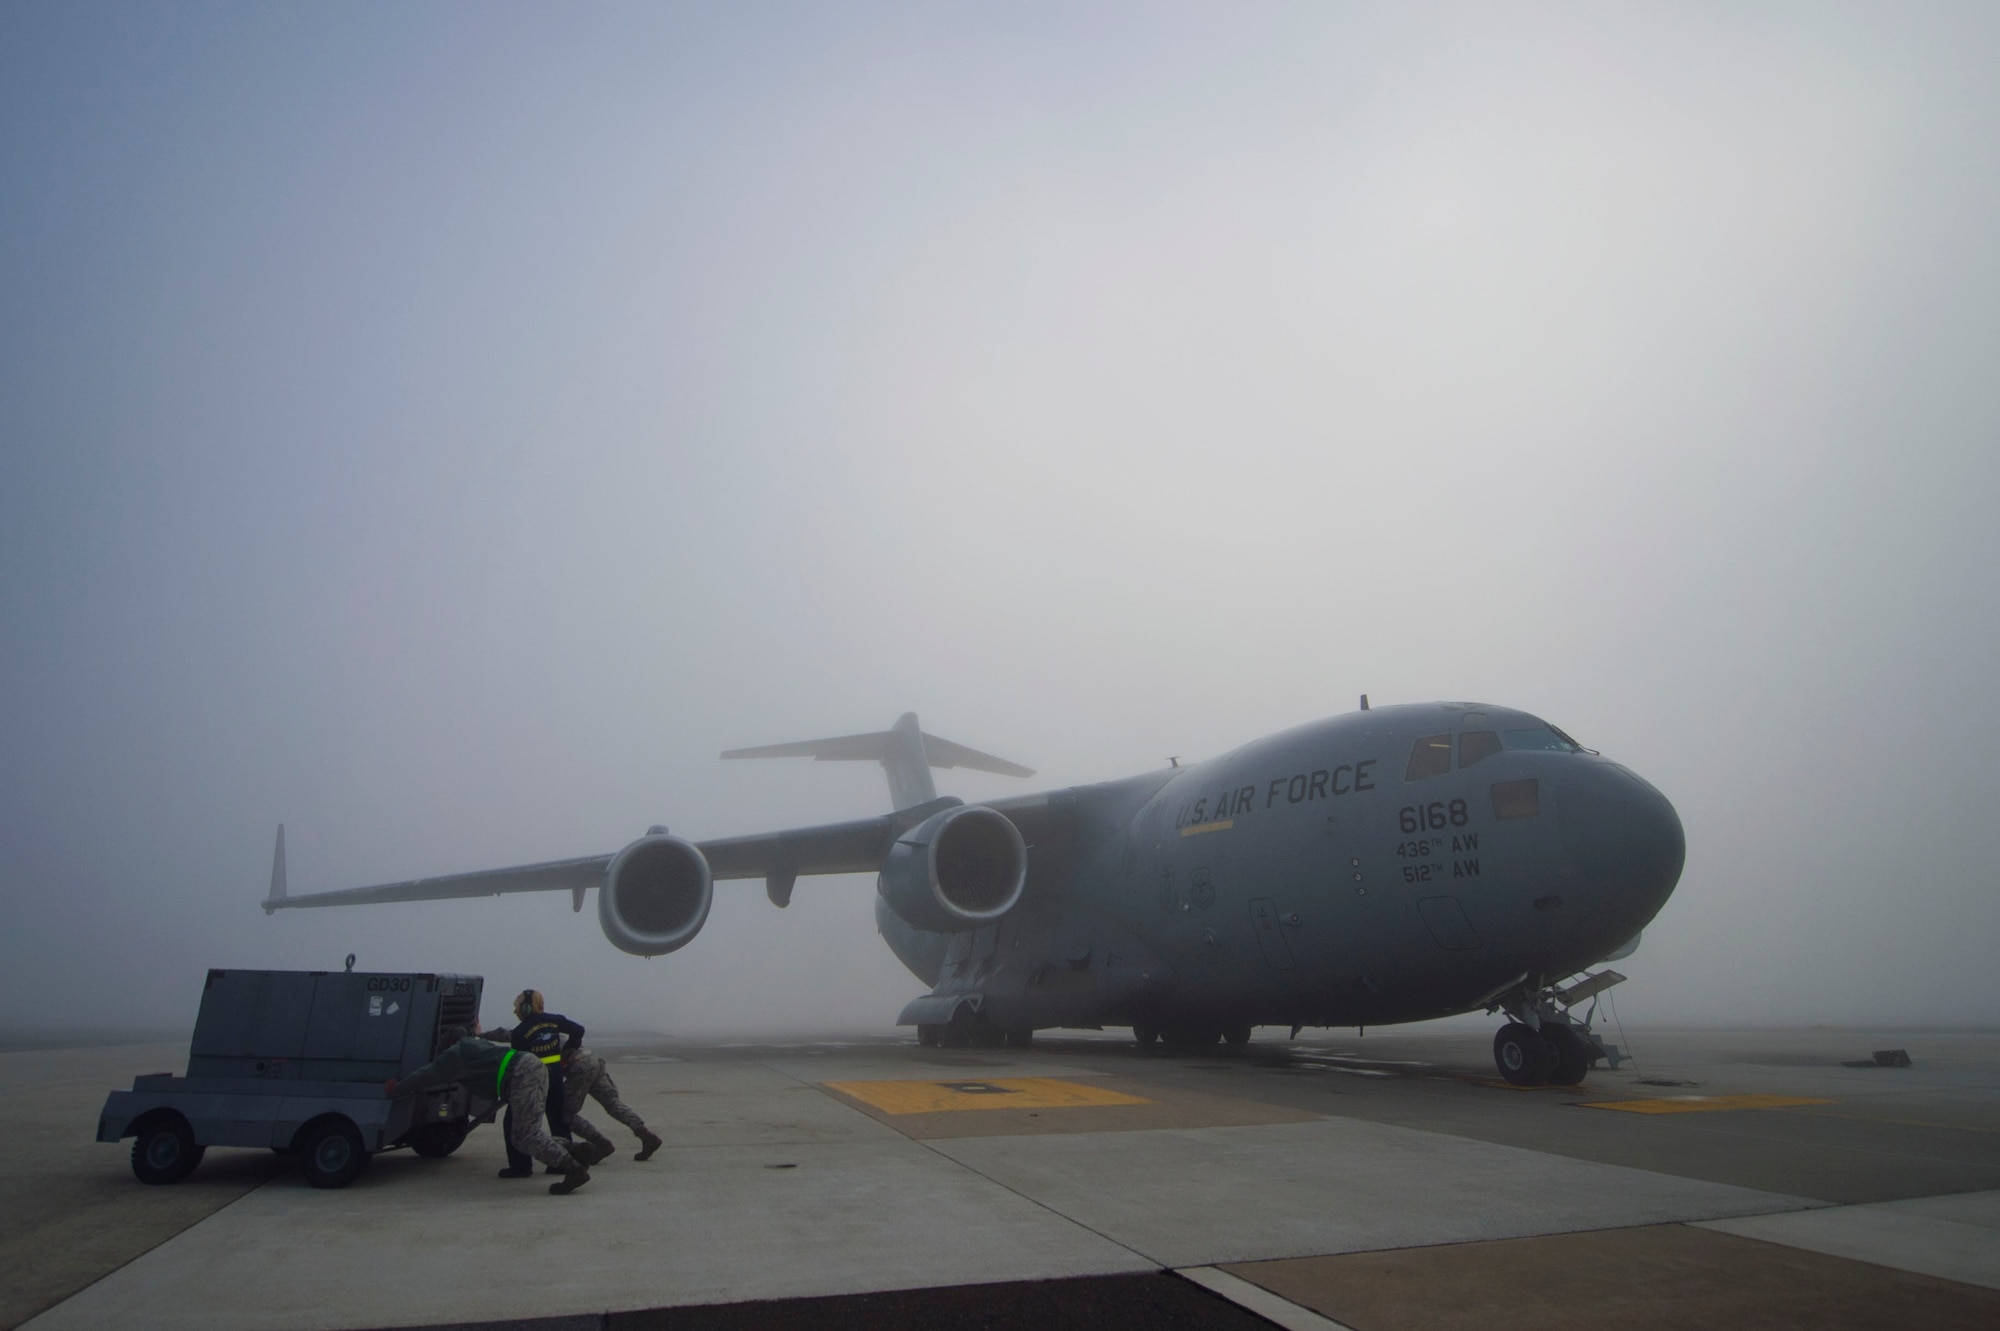 Tech. Sgt. Christine King (middle), 512th Airlift Wing, helps active-duty Airmen push an aircraft generator out of the way in foggy conditions prior to the C-17 Globemaster III aircraft launch on Dover Air Force Base, Del., March 17, 2016. Reservists and active-duty Airmen work side-by-side daily in maintenance and other career fields, fostering Total Force Integration within Team Dover. (U.S. Air Force photo/ Capt. Bernie Kale)